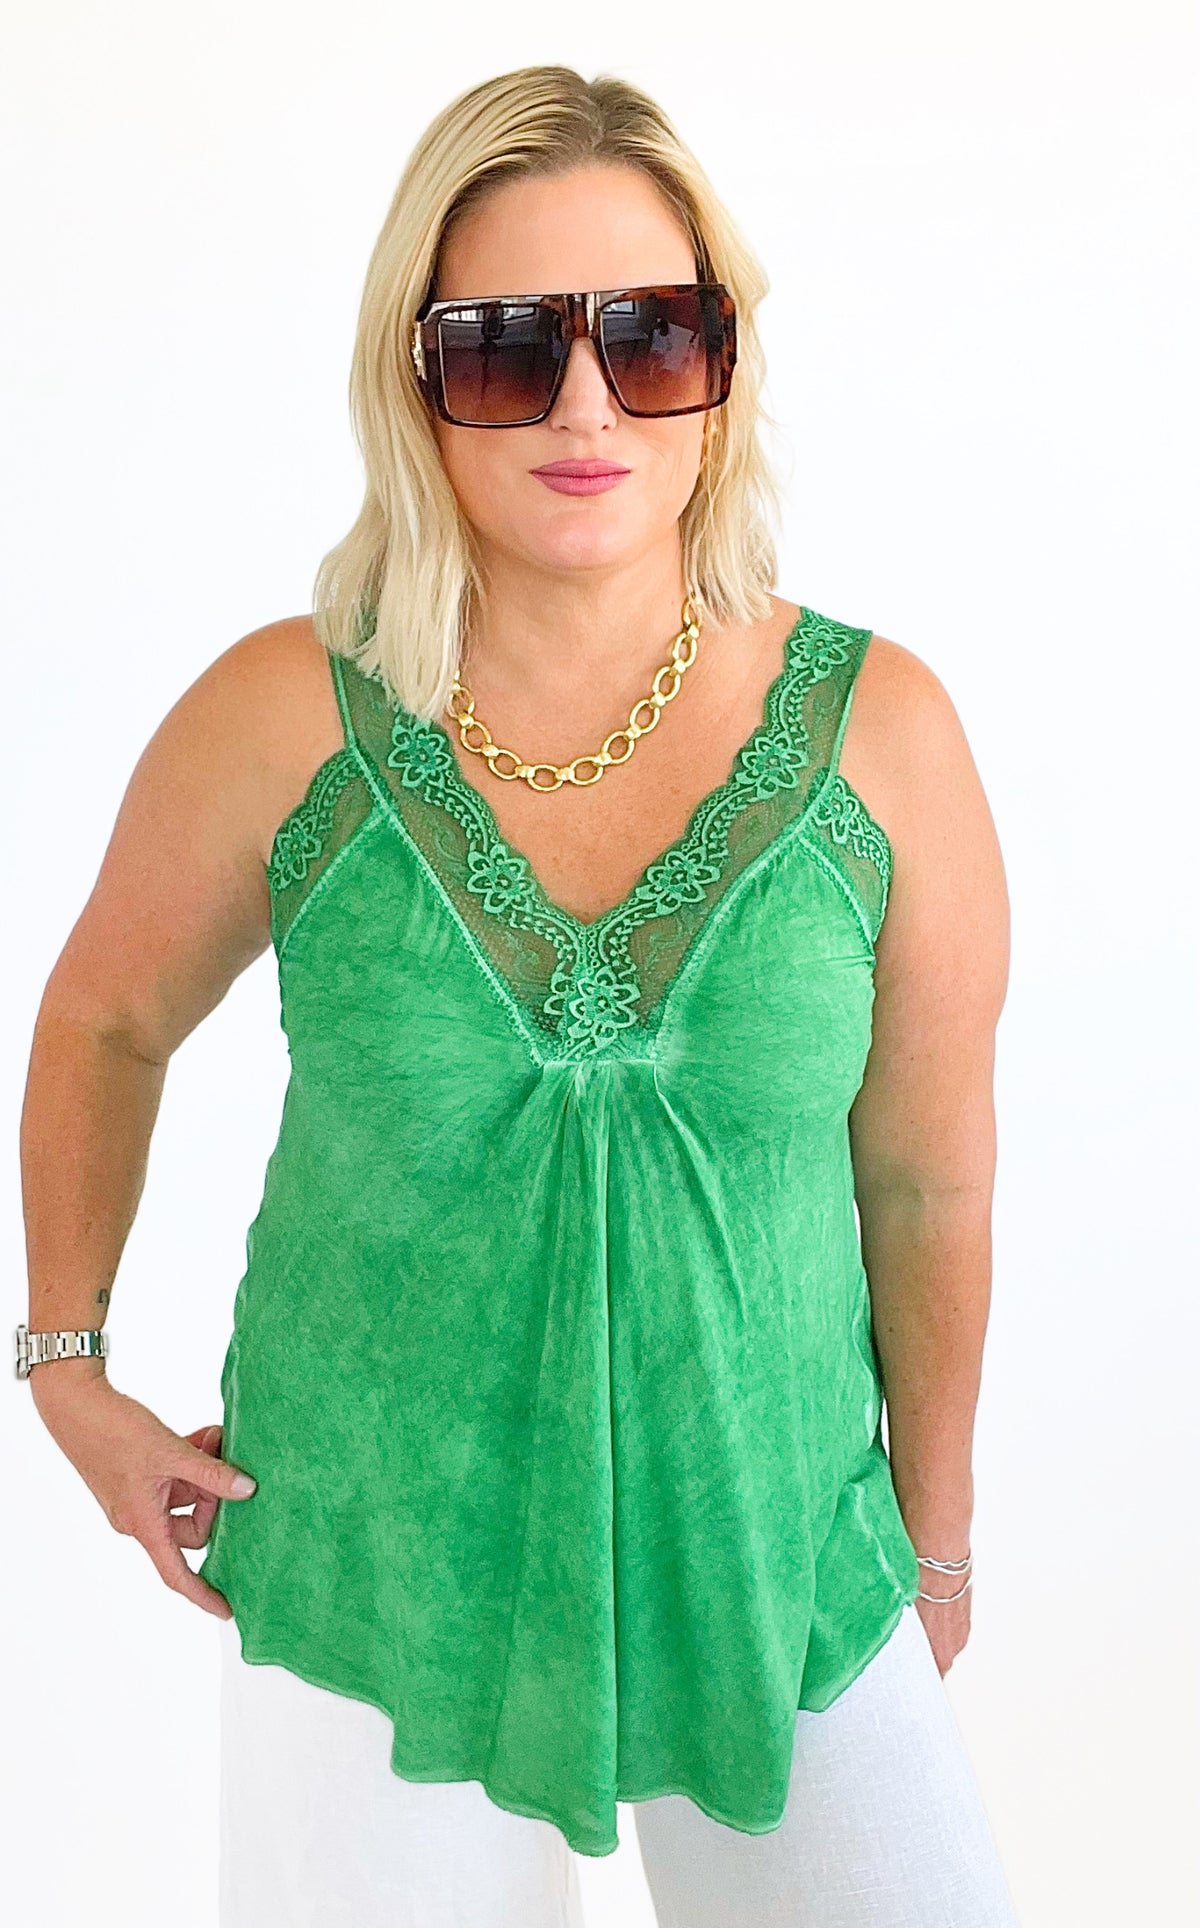 Italian Elegant Lace Trim Cami - Kelly Green-100 Sleeveless Tops-Yolly-Coastal Bloom Boutique, find the trendiest versions of the popular styles and looks Located in Indialantic, FL